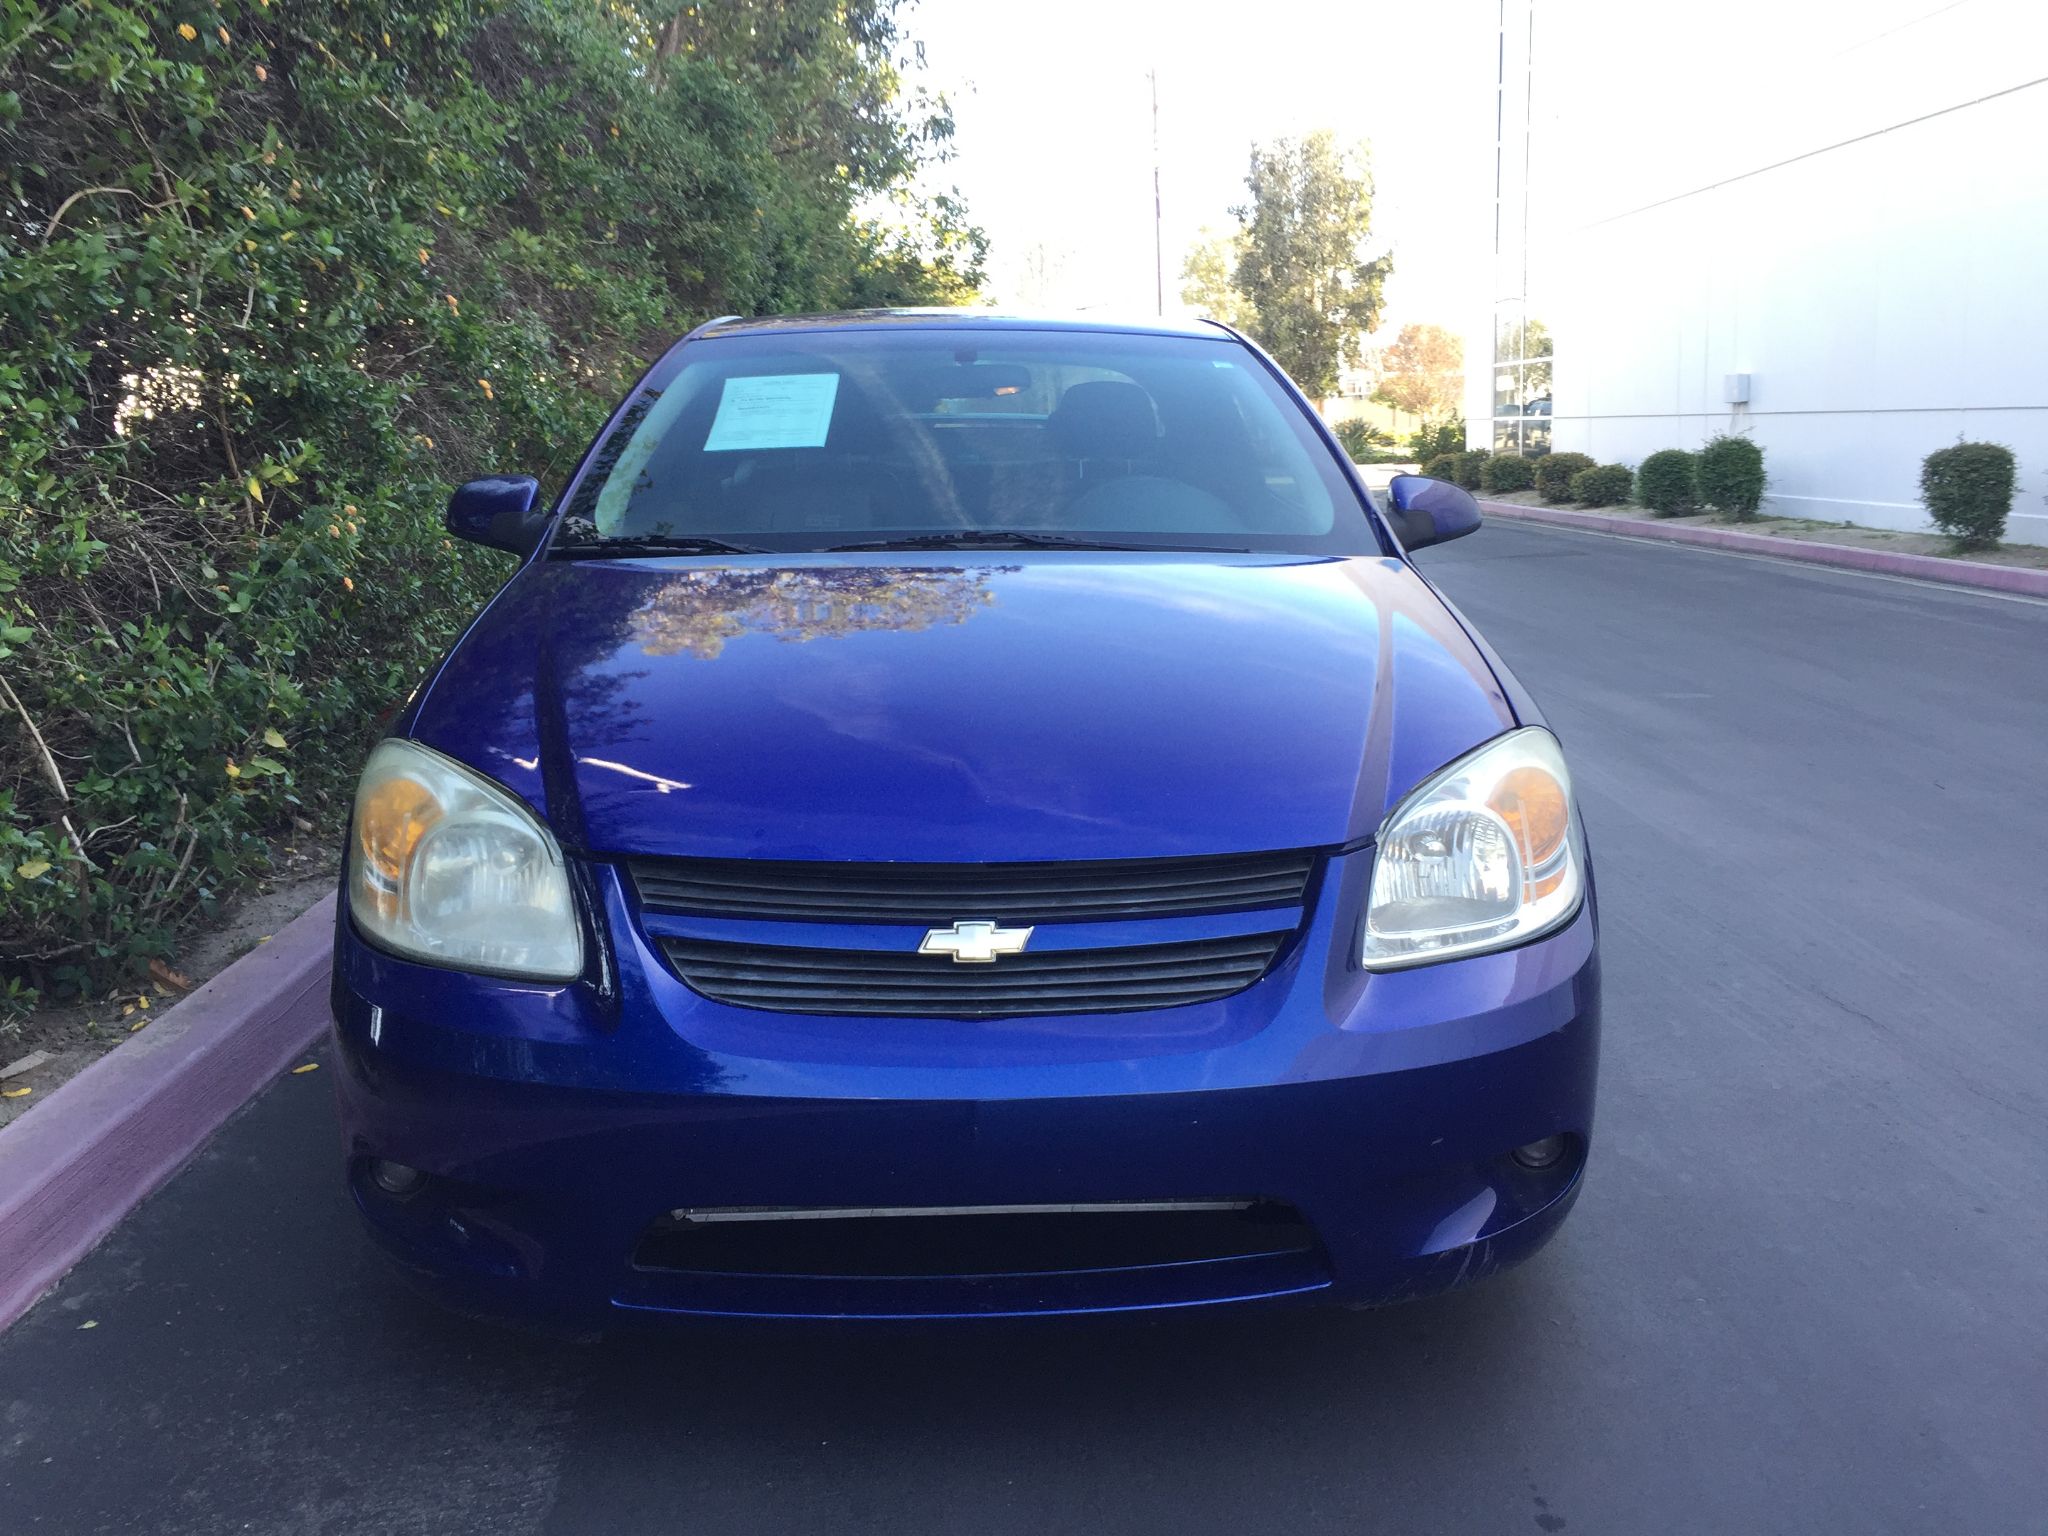 Used 2006 Chevrolet Cobalt SS at City Cars Warehouse INC